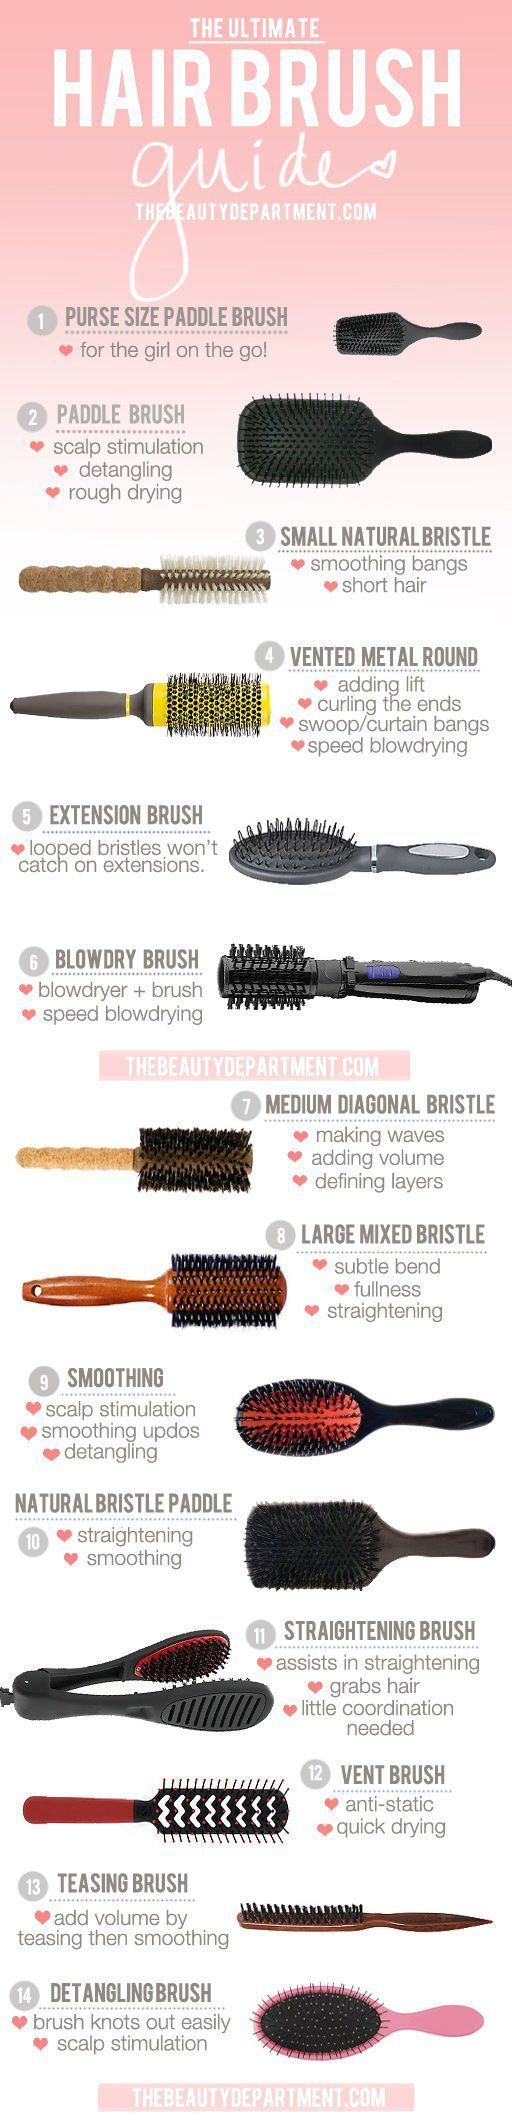 The Best Hair Brush For Your Hair Type | Here's A Great List Of Beauty Tips That...